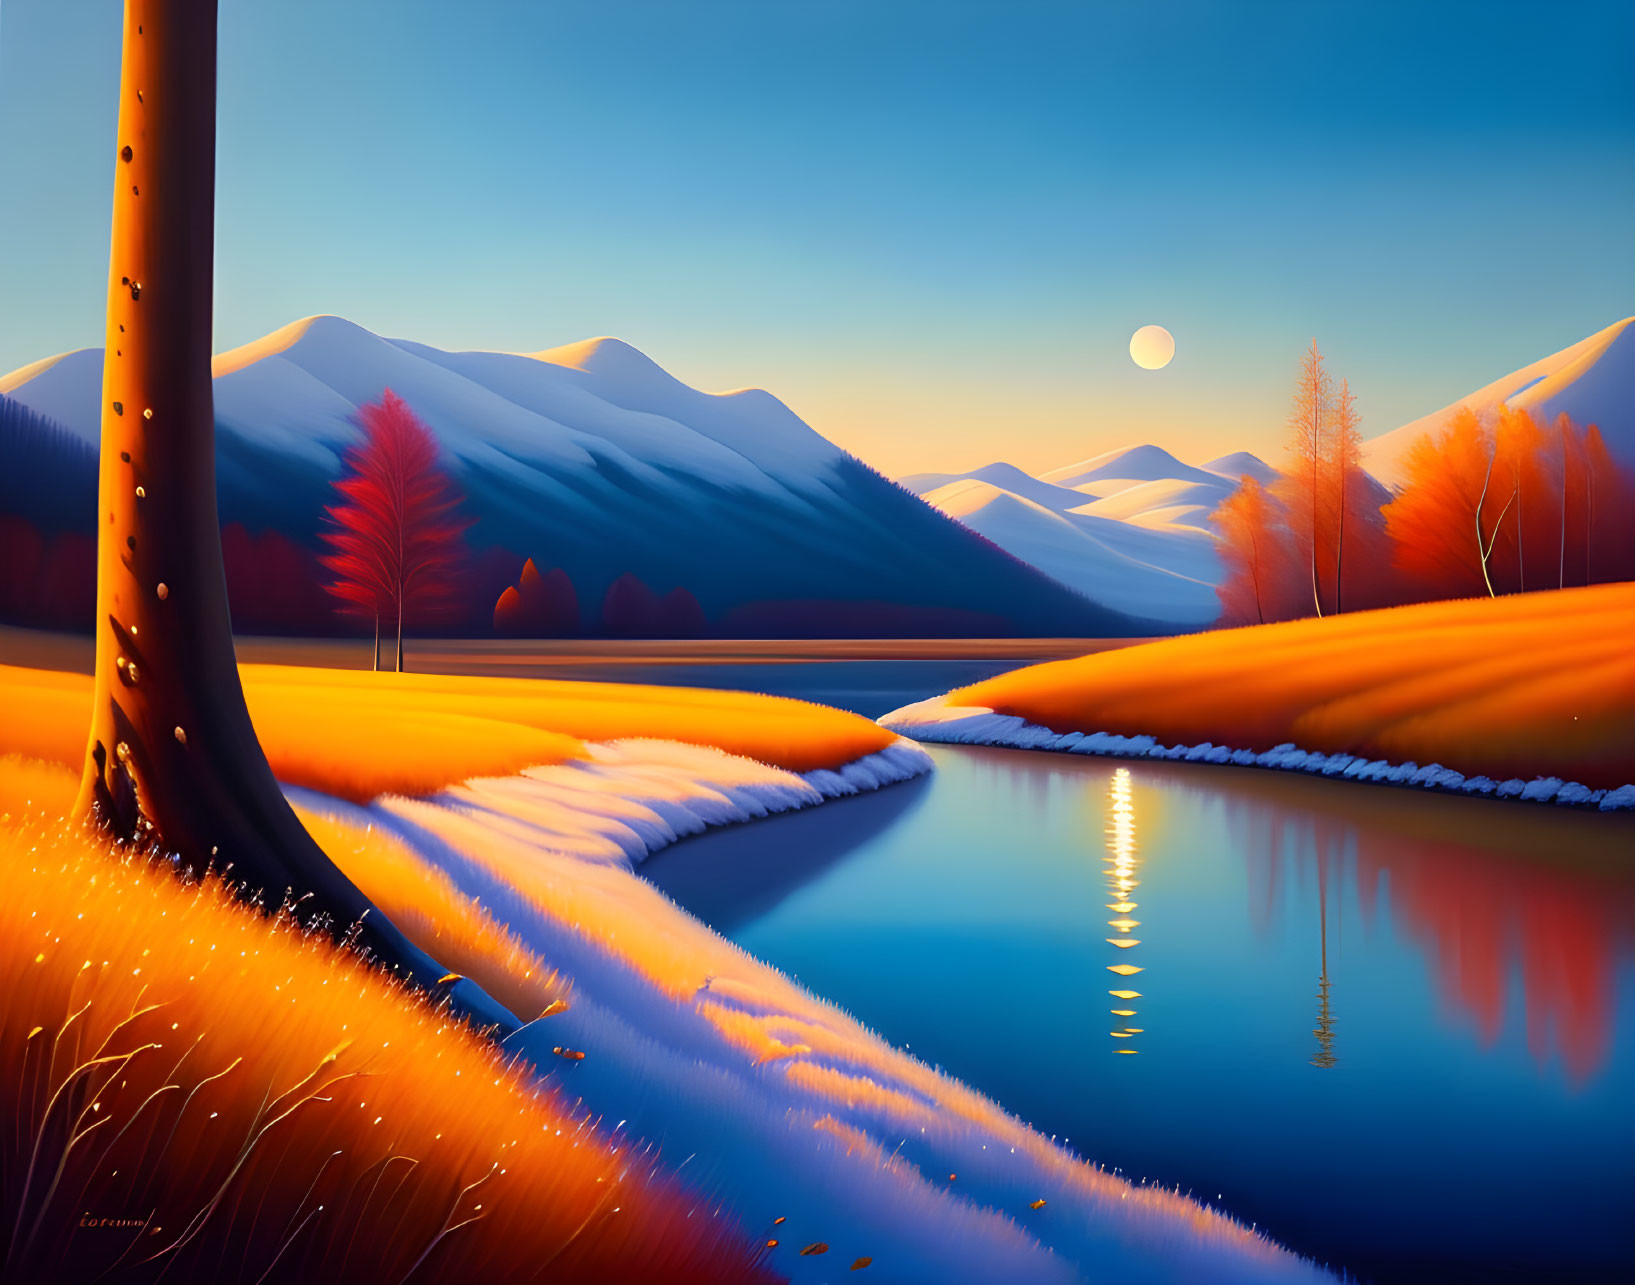 Serene river landscape with autumn trees and snow-capped mountains